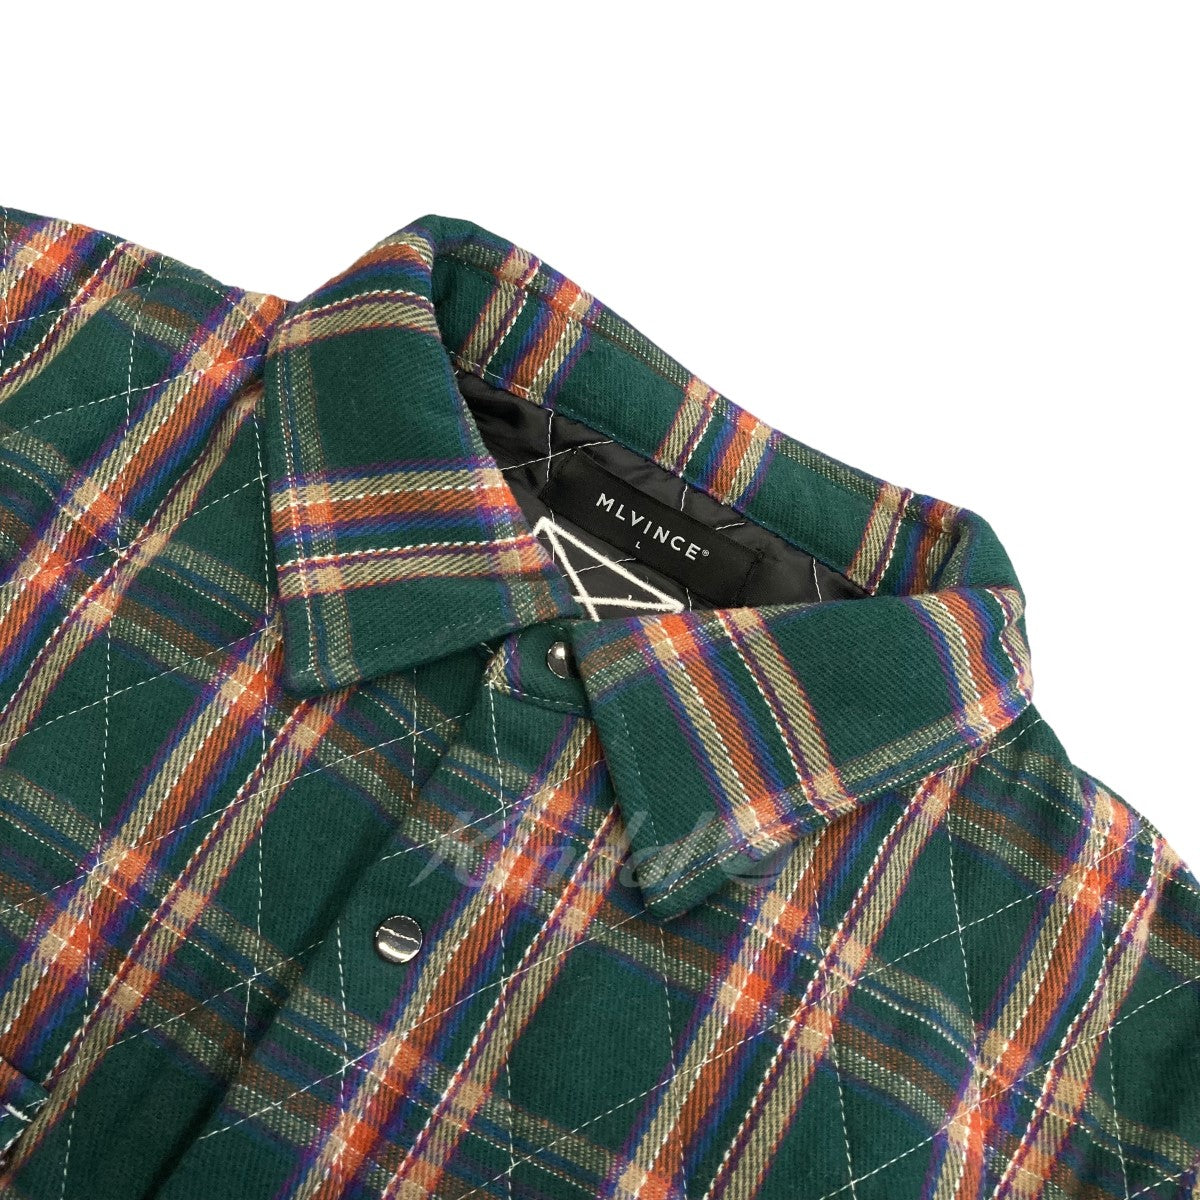 MLVINCE(メルヴィンス) 「QUILTED CHECK SHIRTS JACKET」 チェック柄 ...